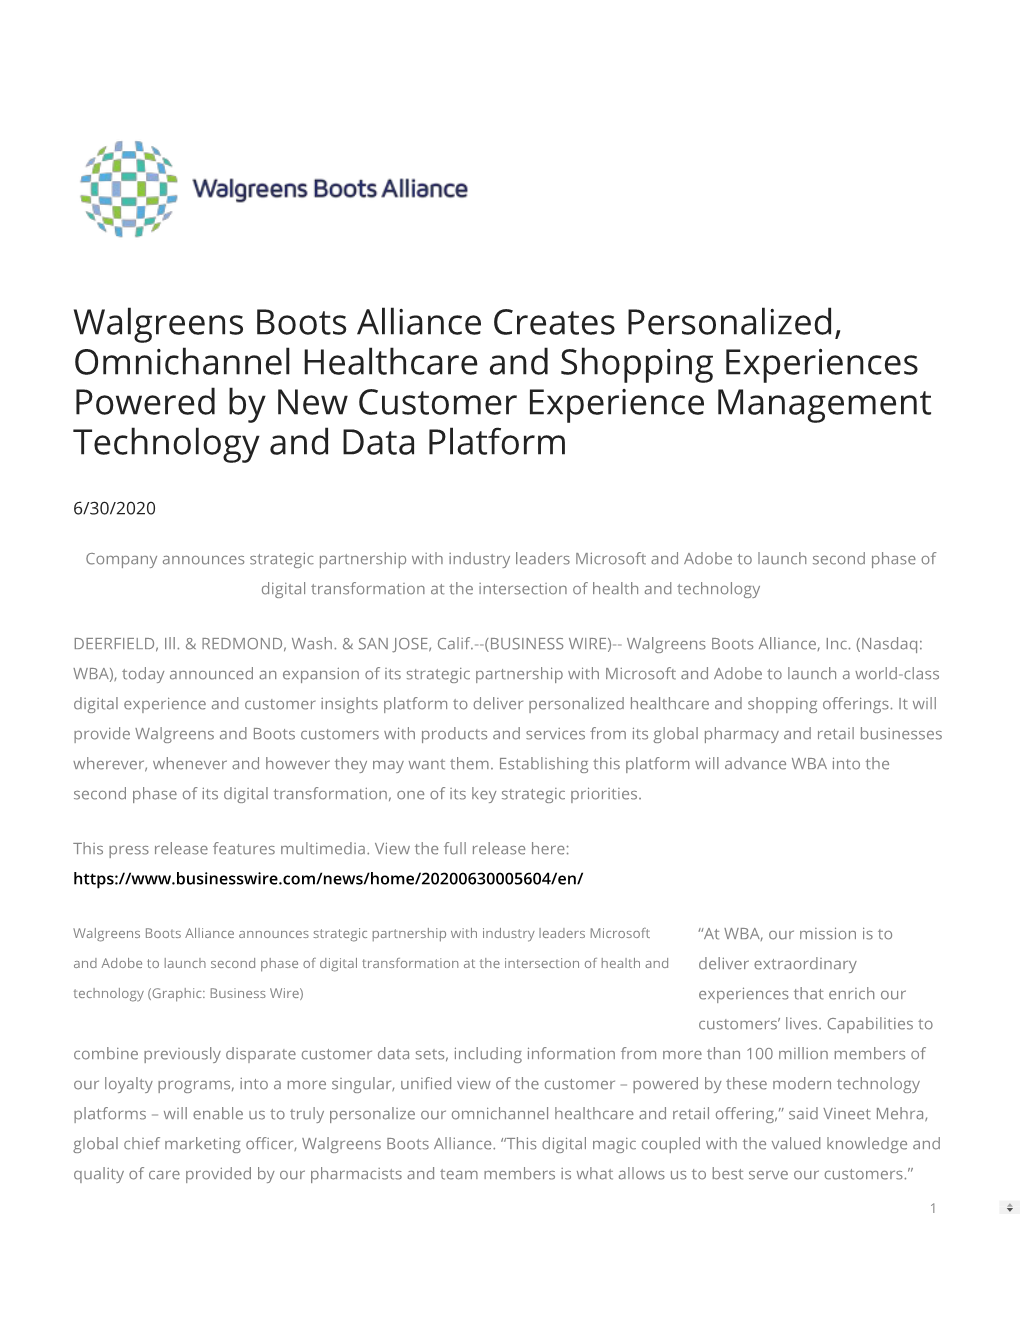 Walgreens Boots Alliance Creates Personalized, Omnichannel